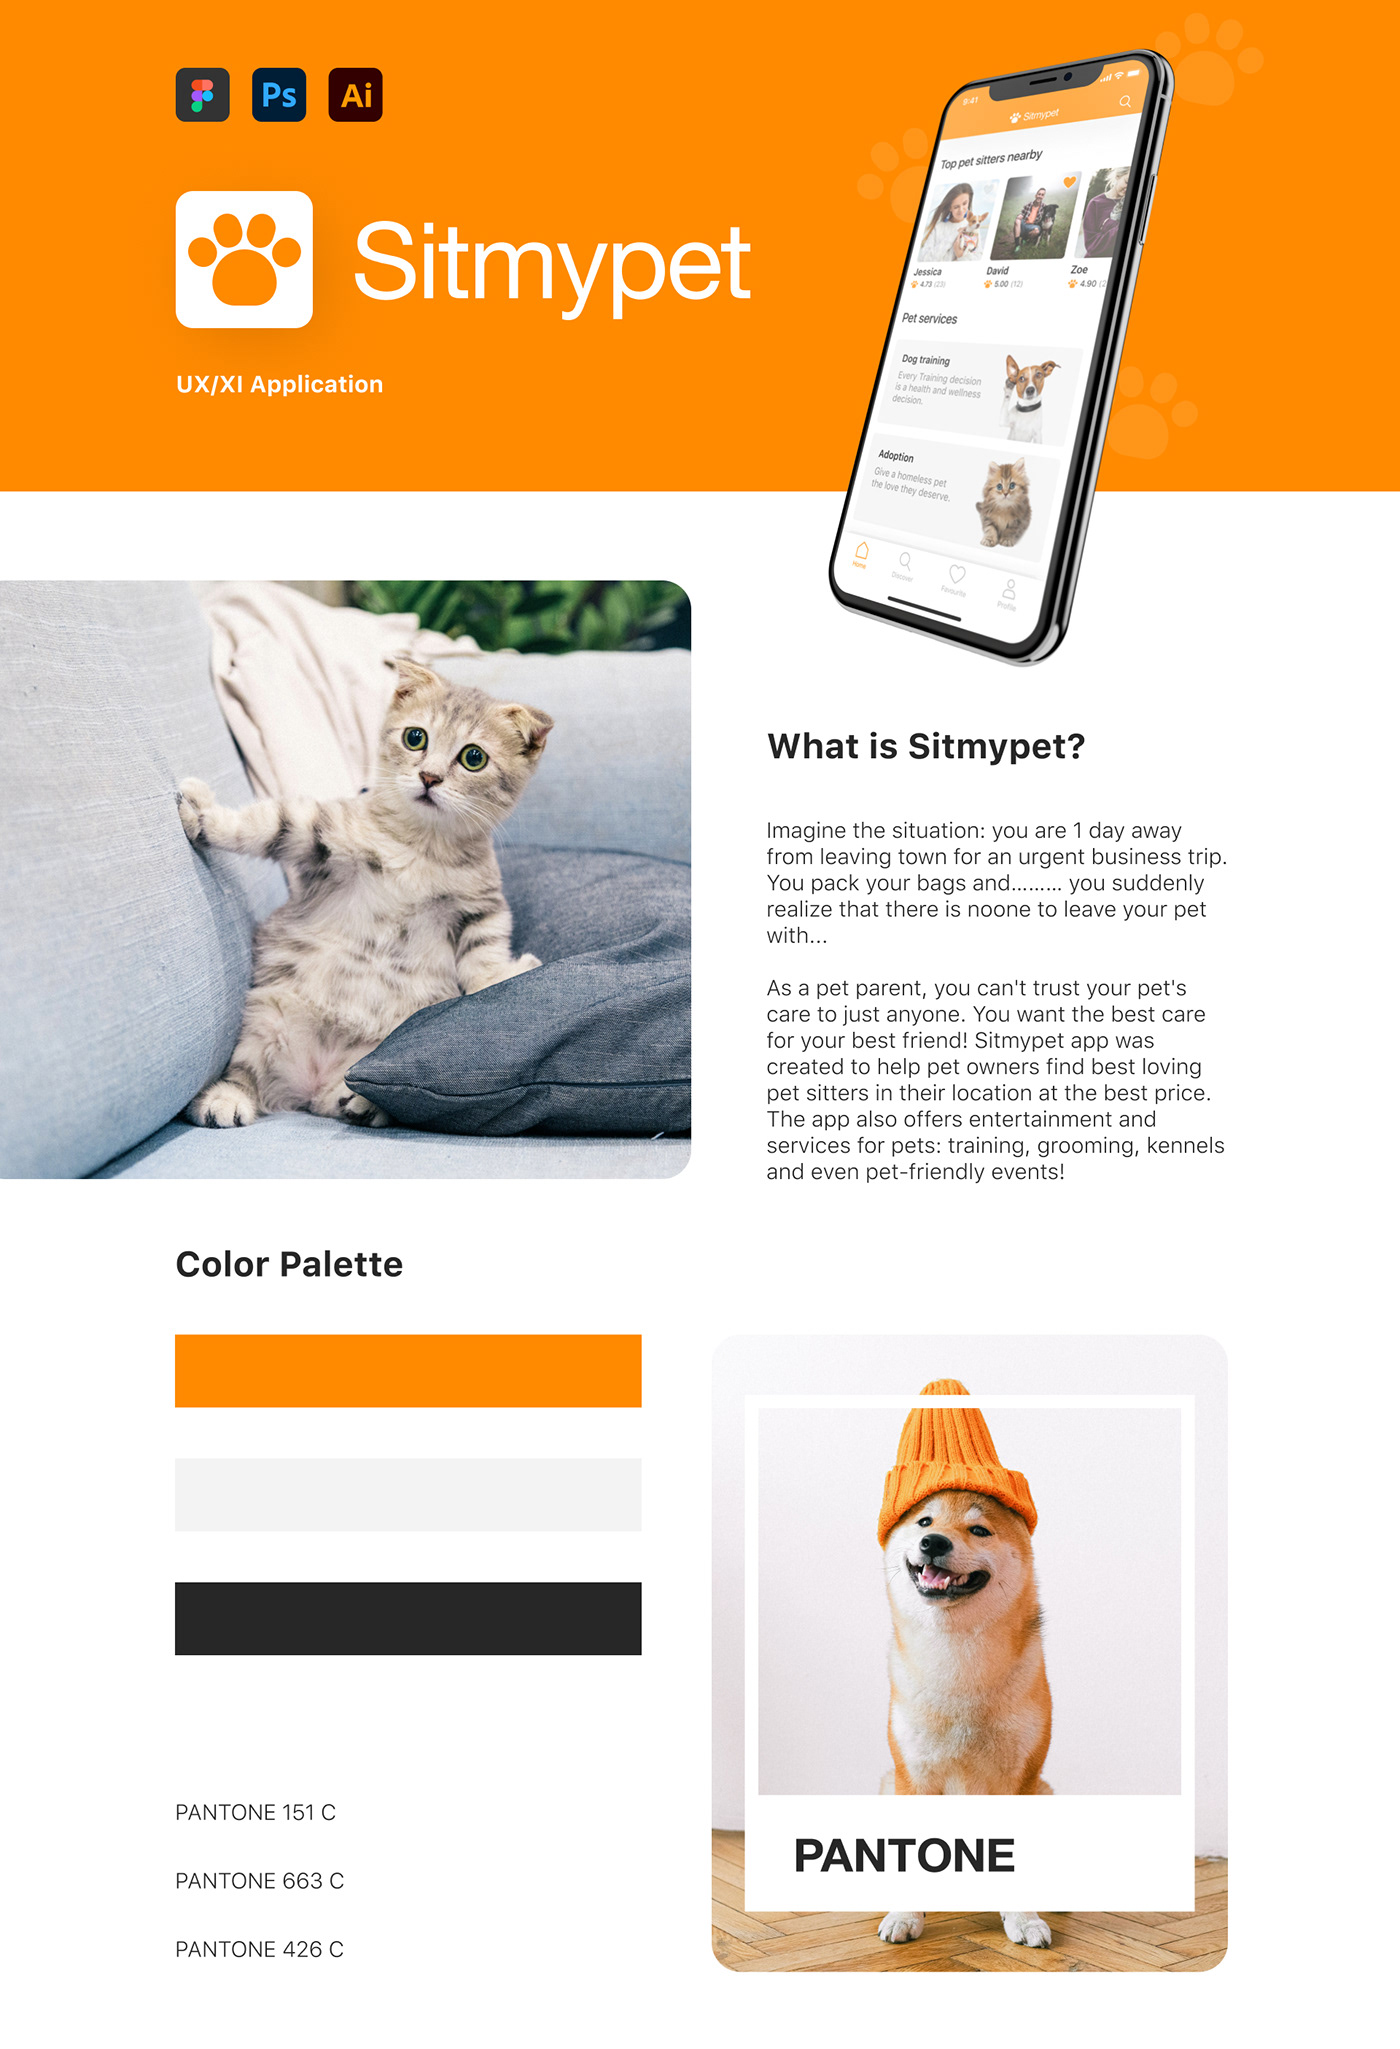 app was created to help pet owners find best loving pet sitters in their location at the best price.